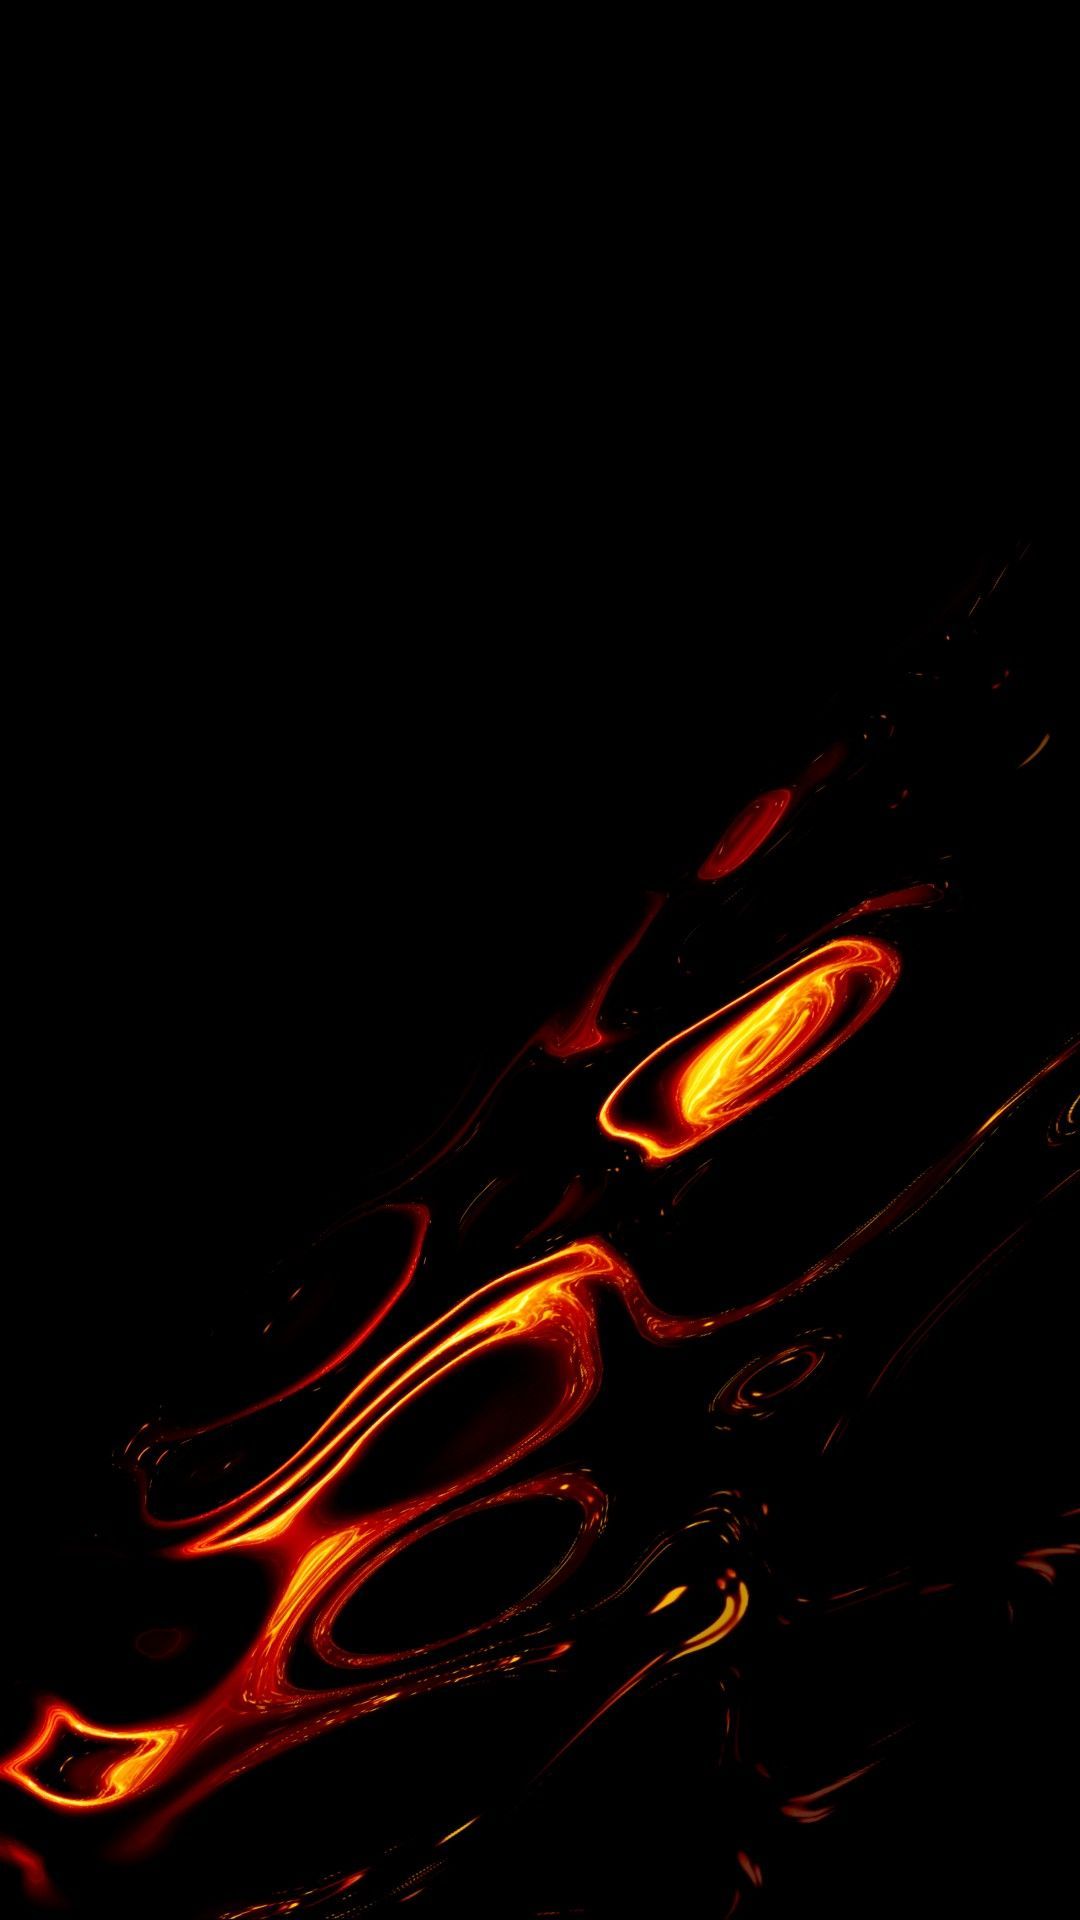 Black AMOLED Wallpaper, Download From WallPixel Android App